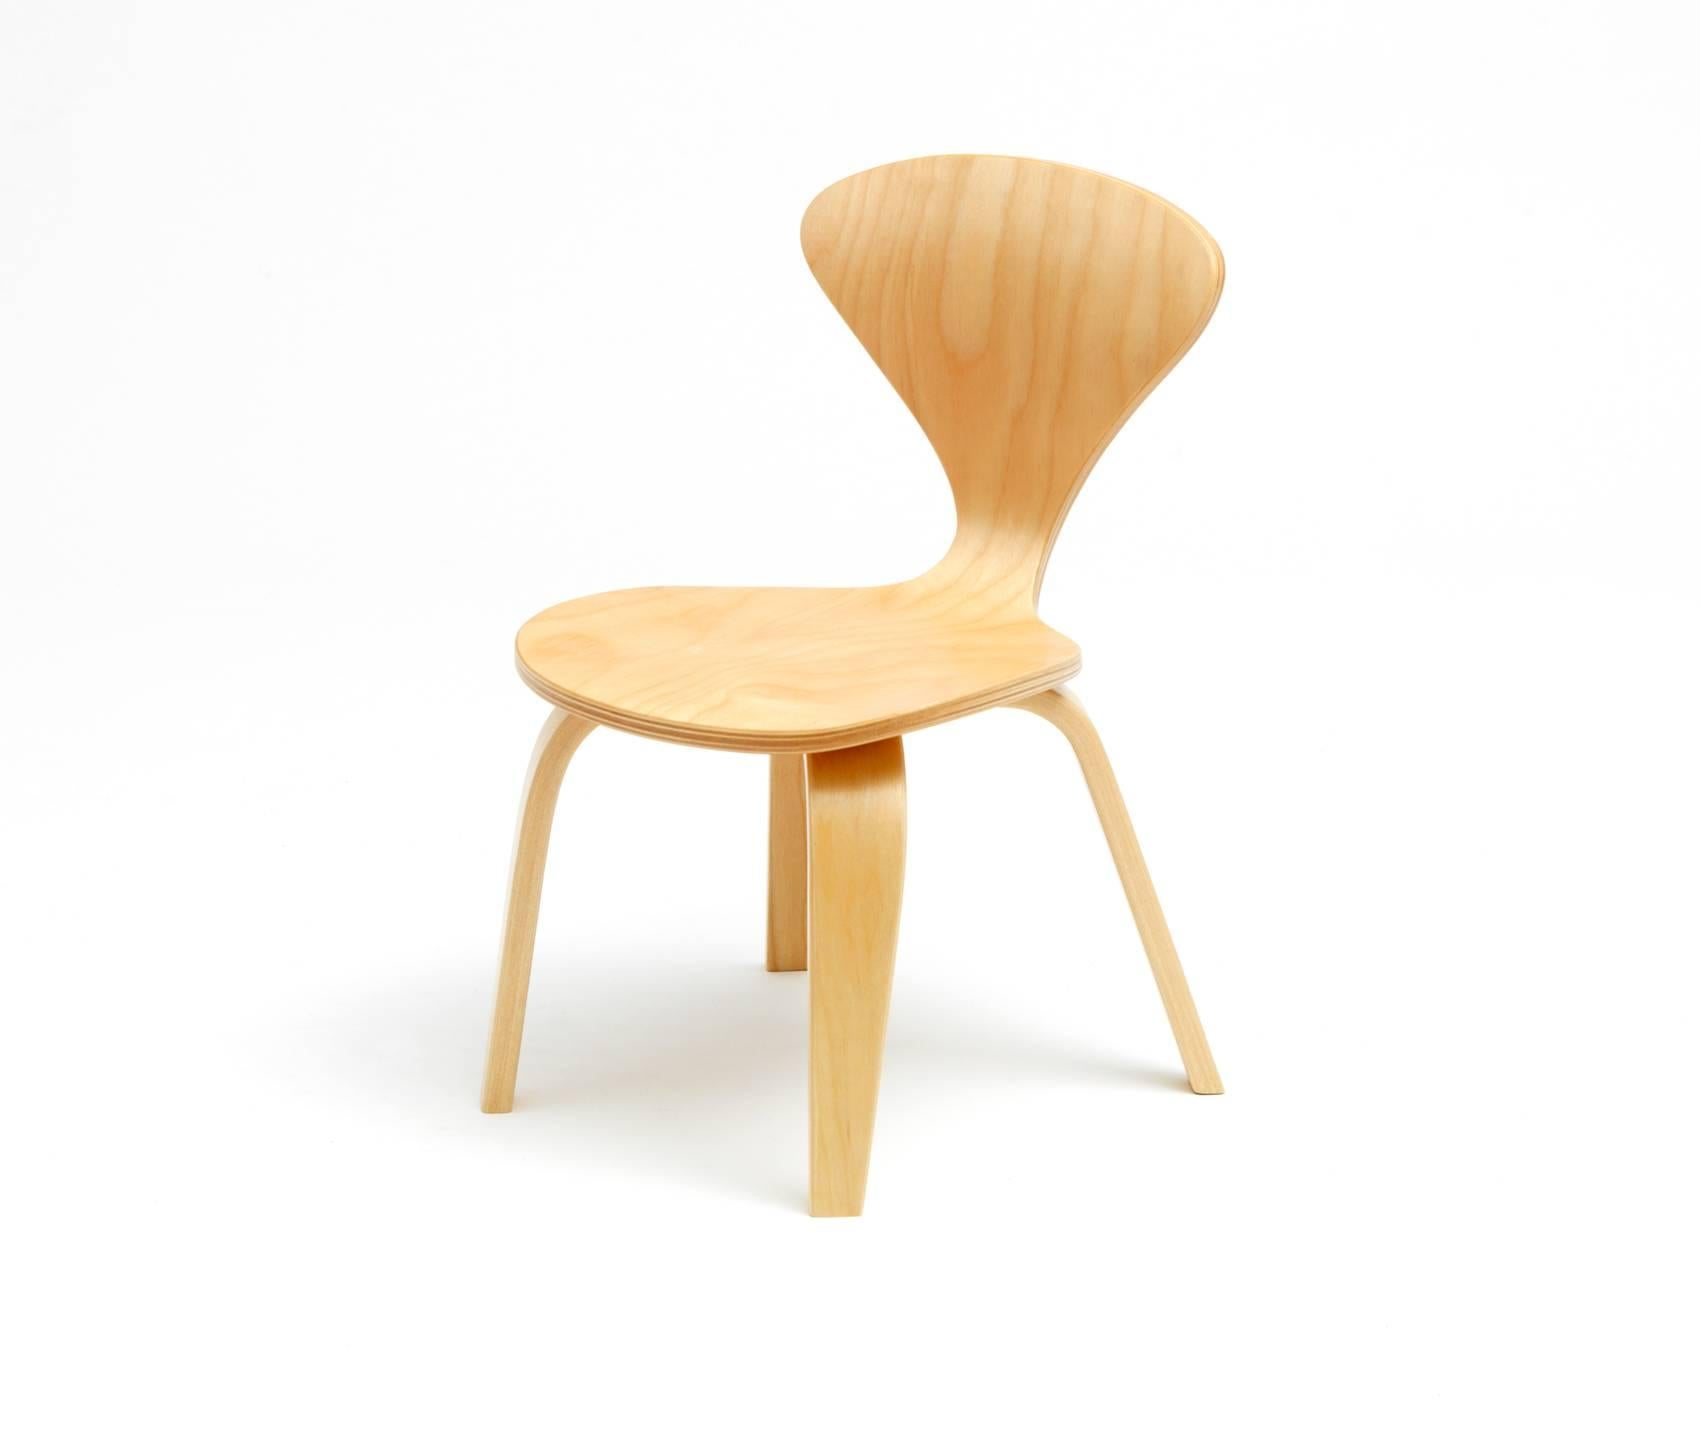 American Cherner Child Chair by Benjamin Cherner in Birch, Contemporary, USA, 2007 For Sale